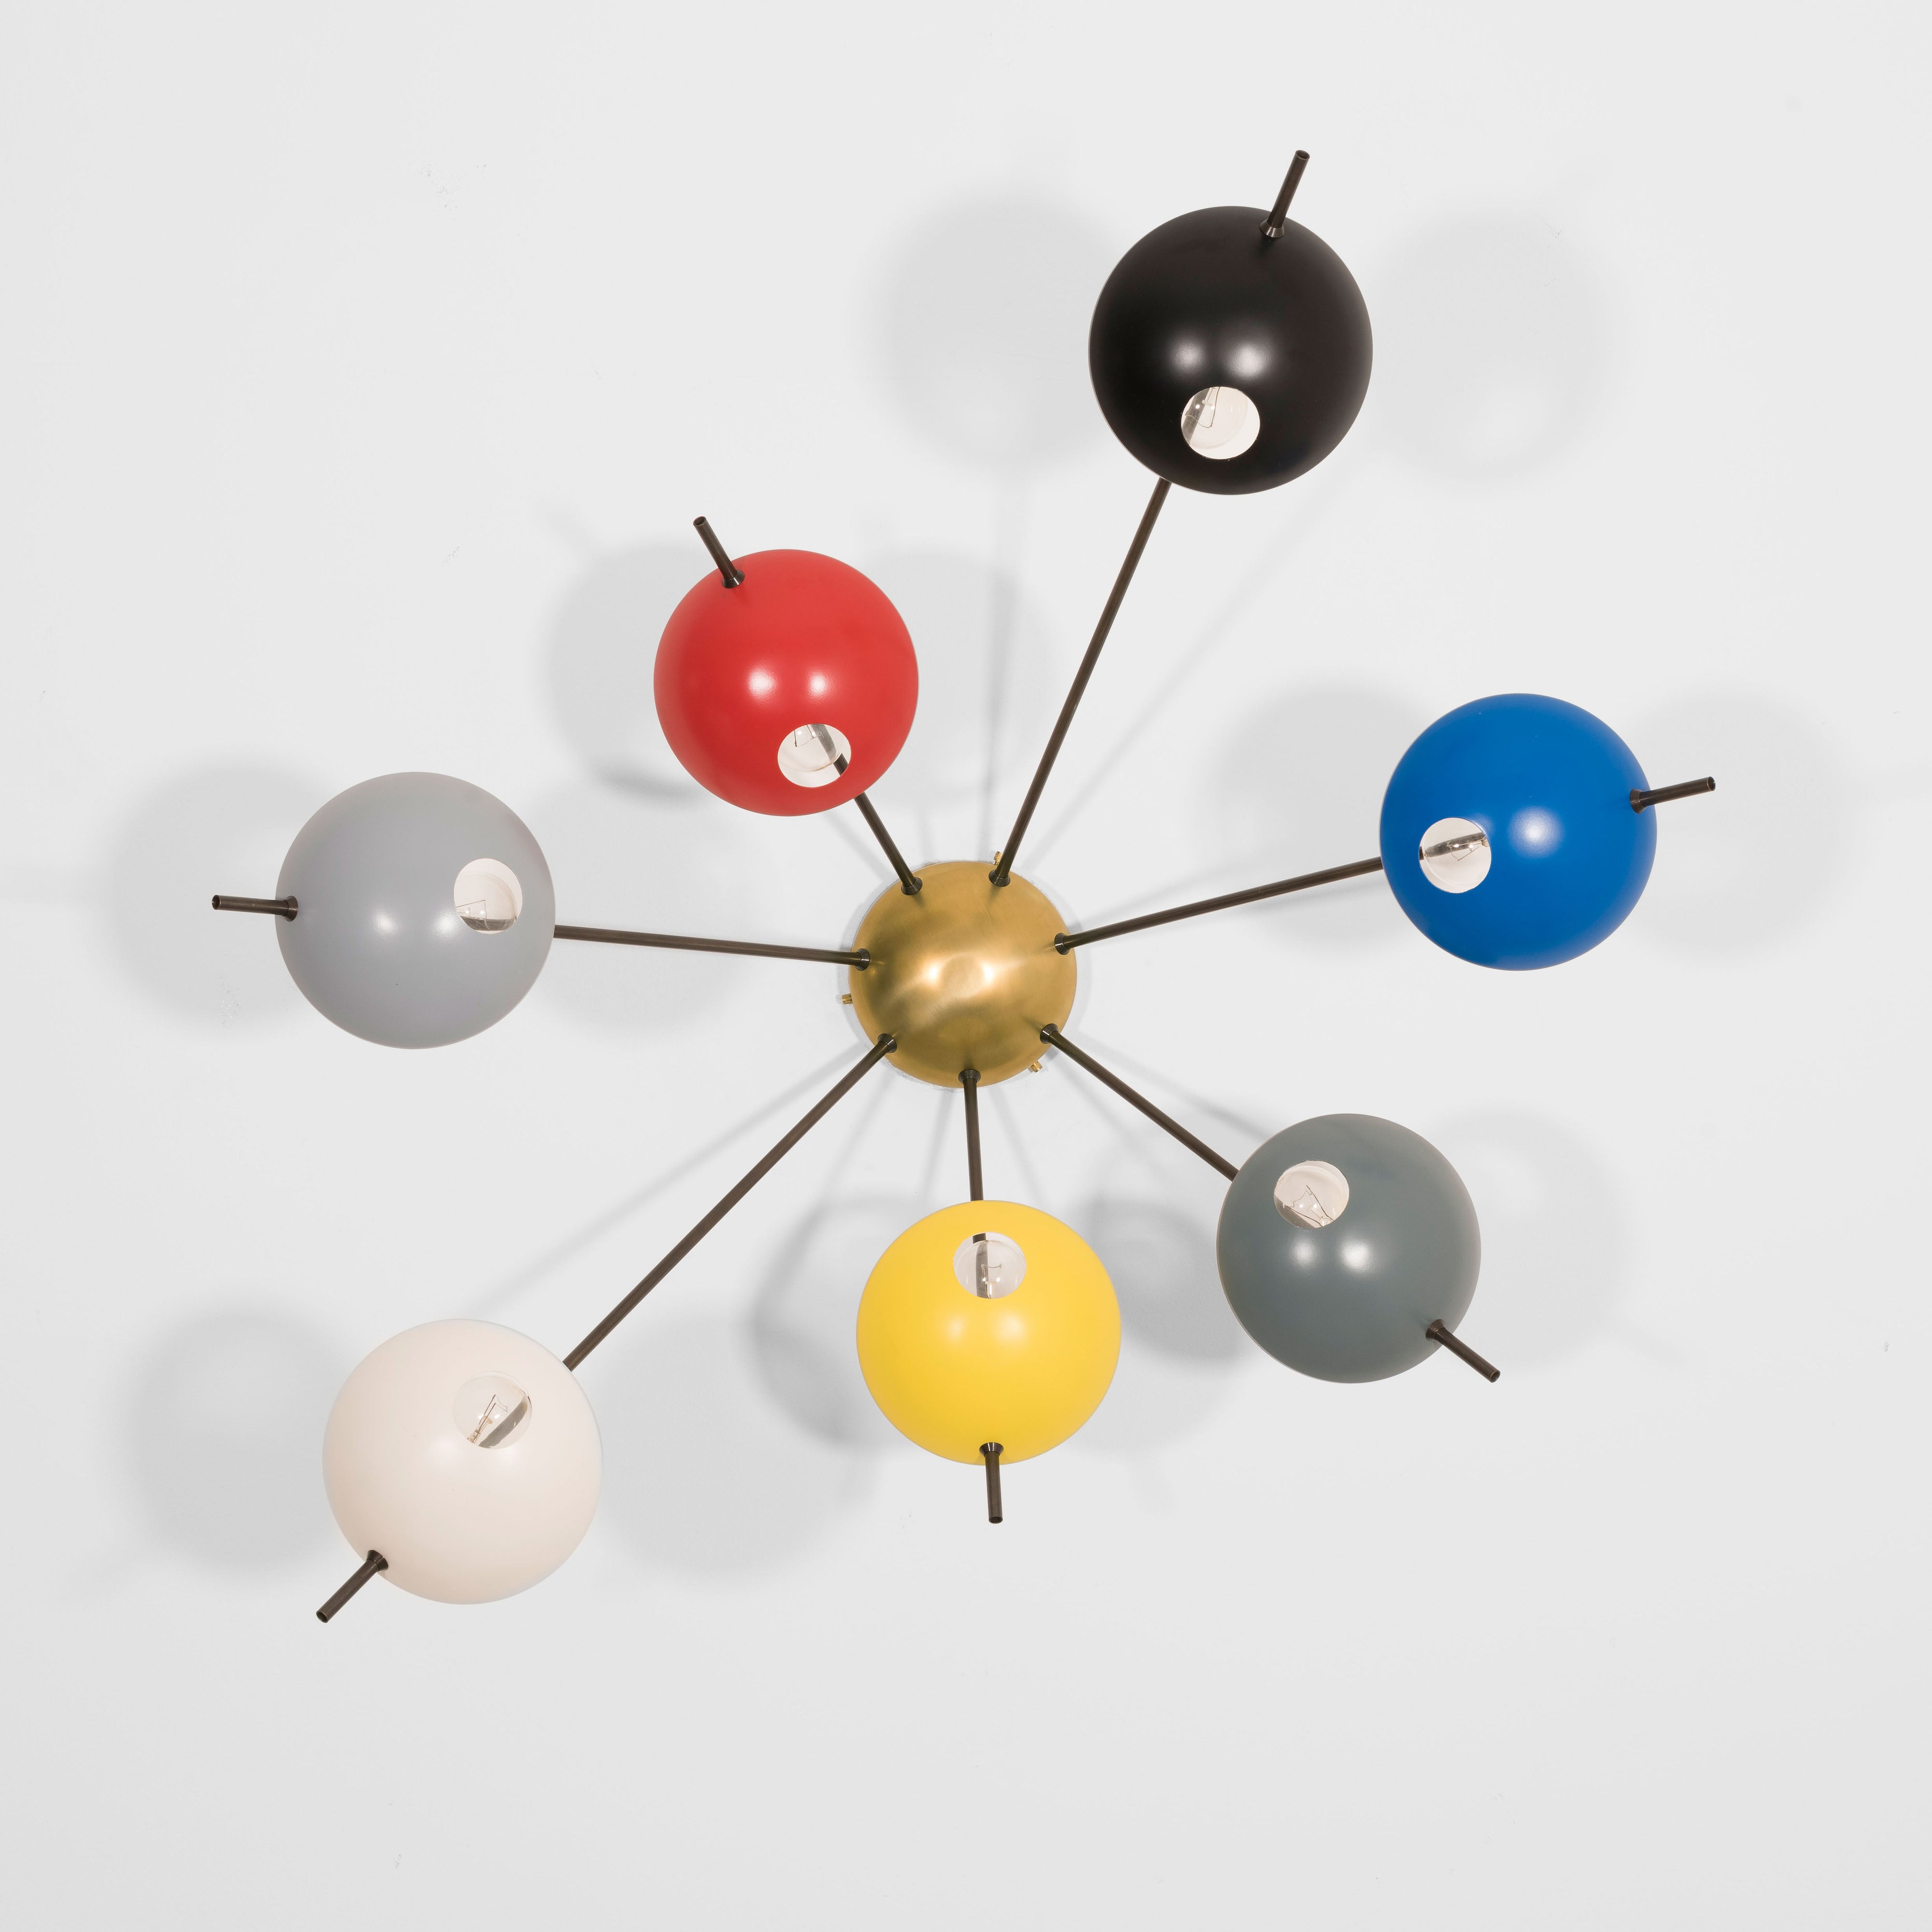 Septem I, with its elements and its shapes simplicity and with its light and shadow effects, represents a tribute to sundials, ancient solar clocks. From a brass core, 7 thin arms branch off, lightly supporting 7 painted brass plates. Septem I becomes a point of light and color in any home interiors, an element of creative and colored decoration. 